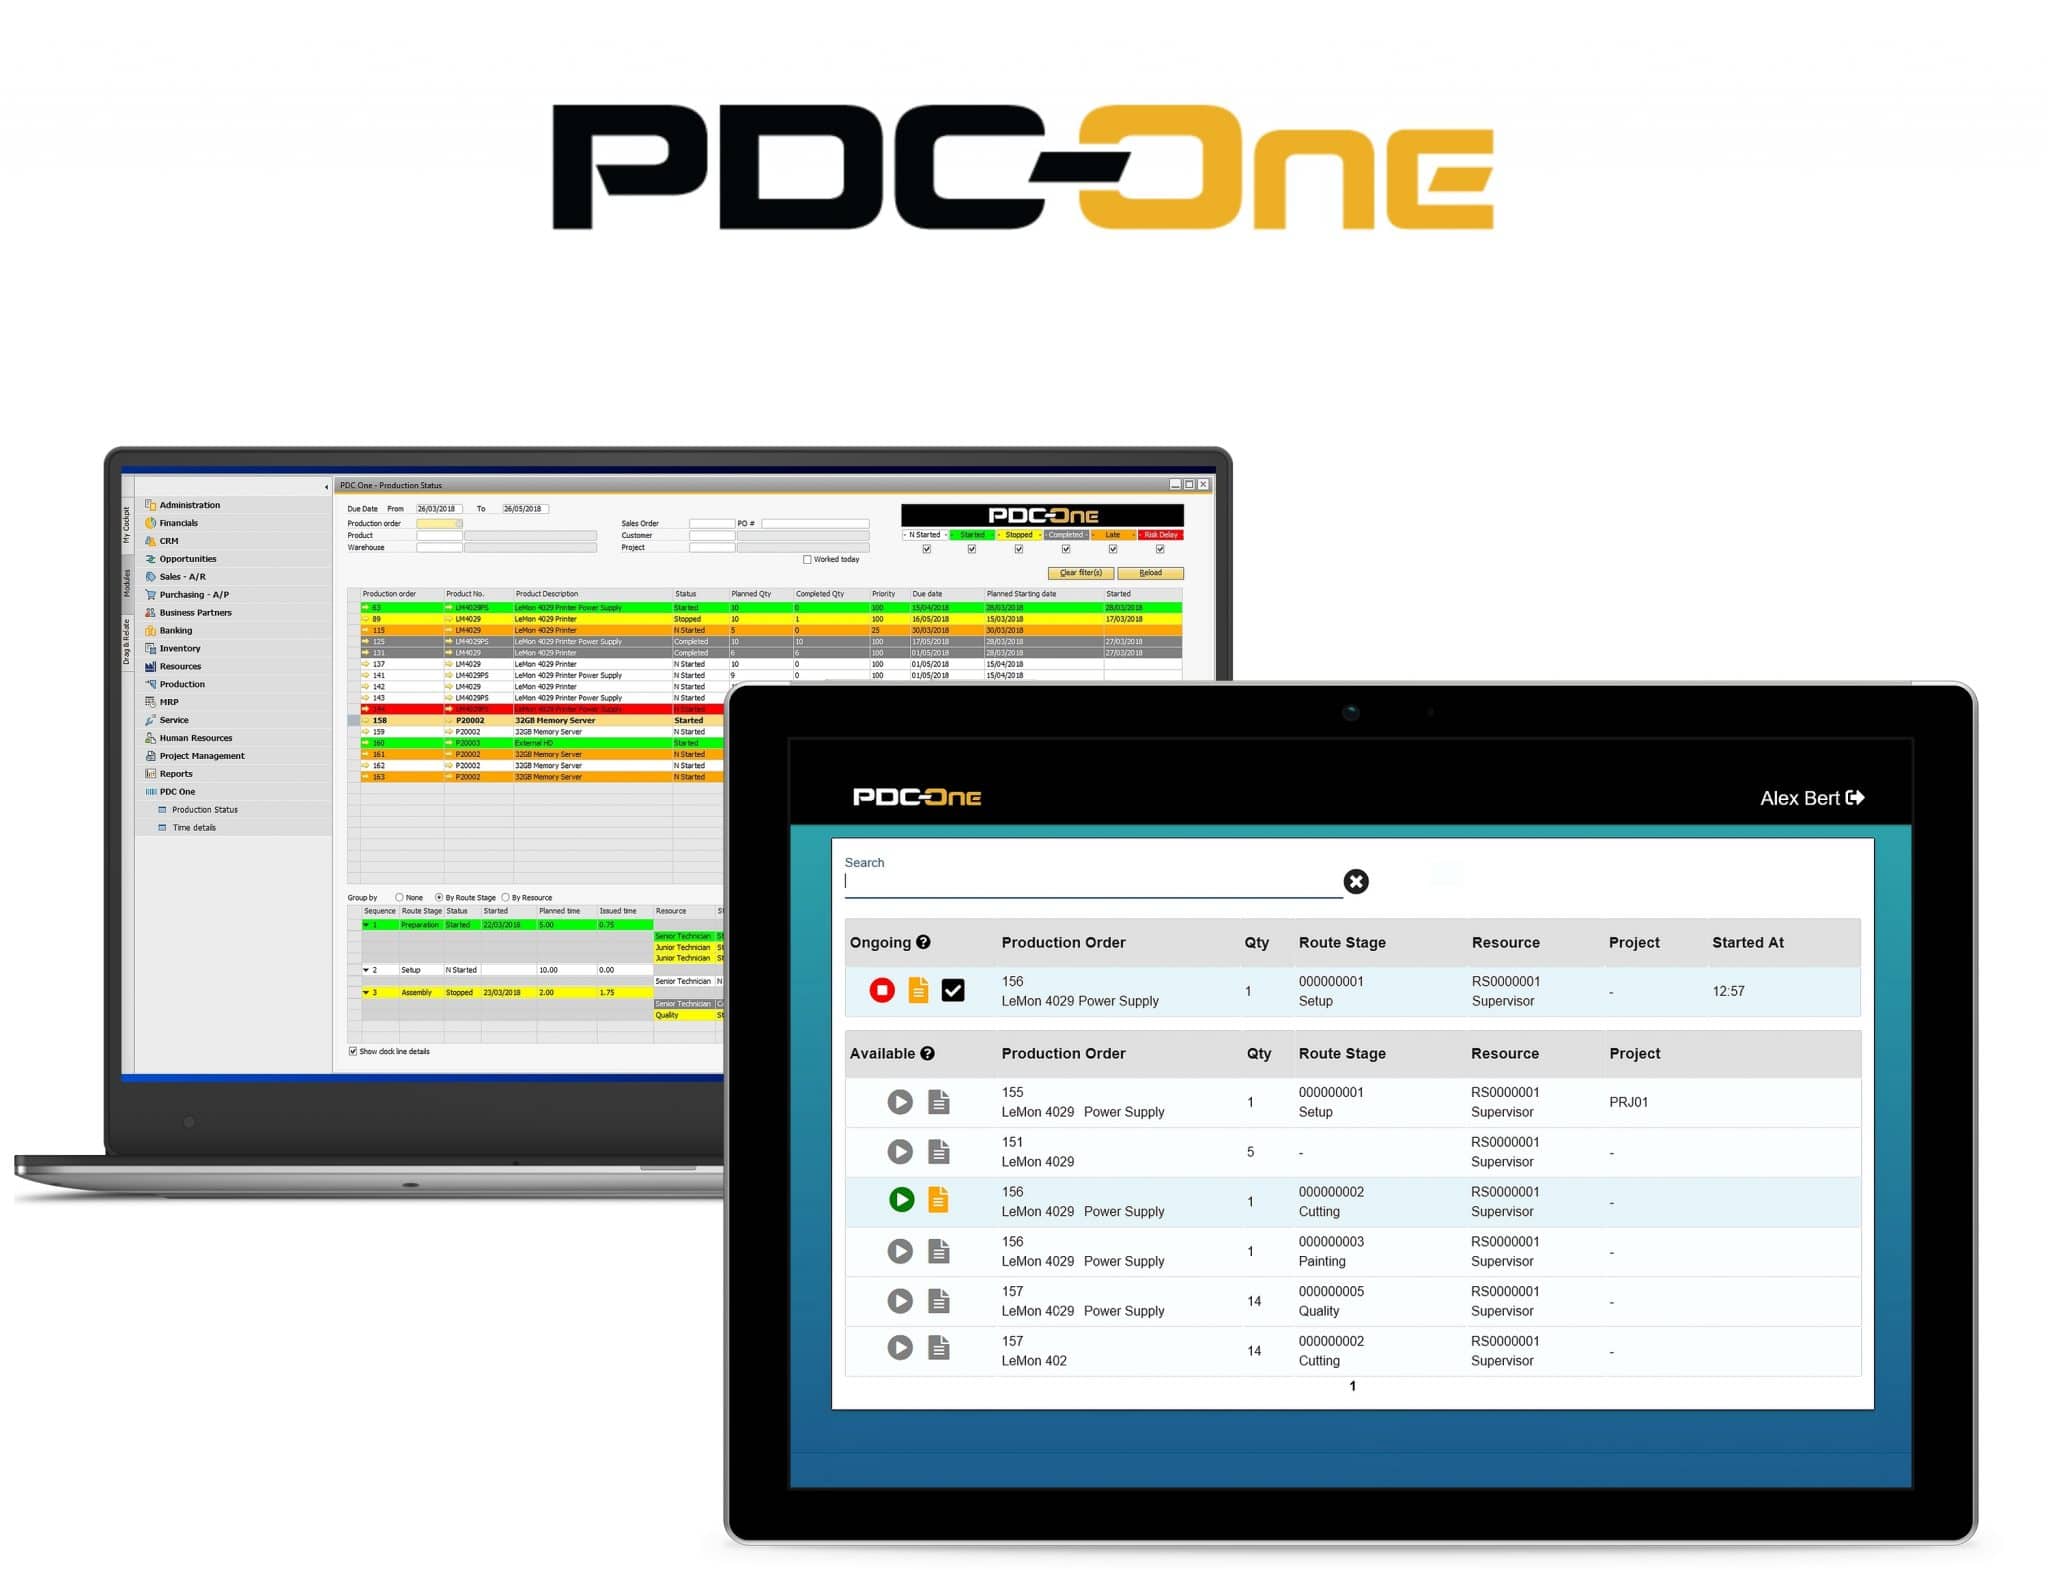 PDC-One - One Screens